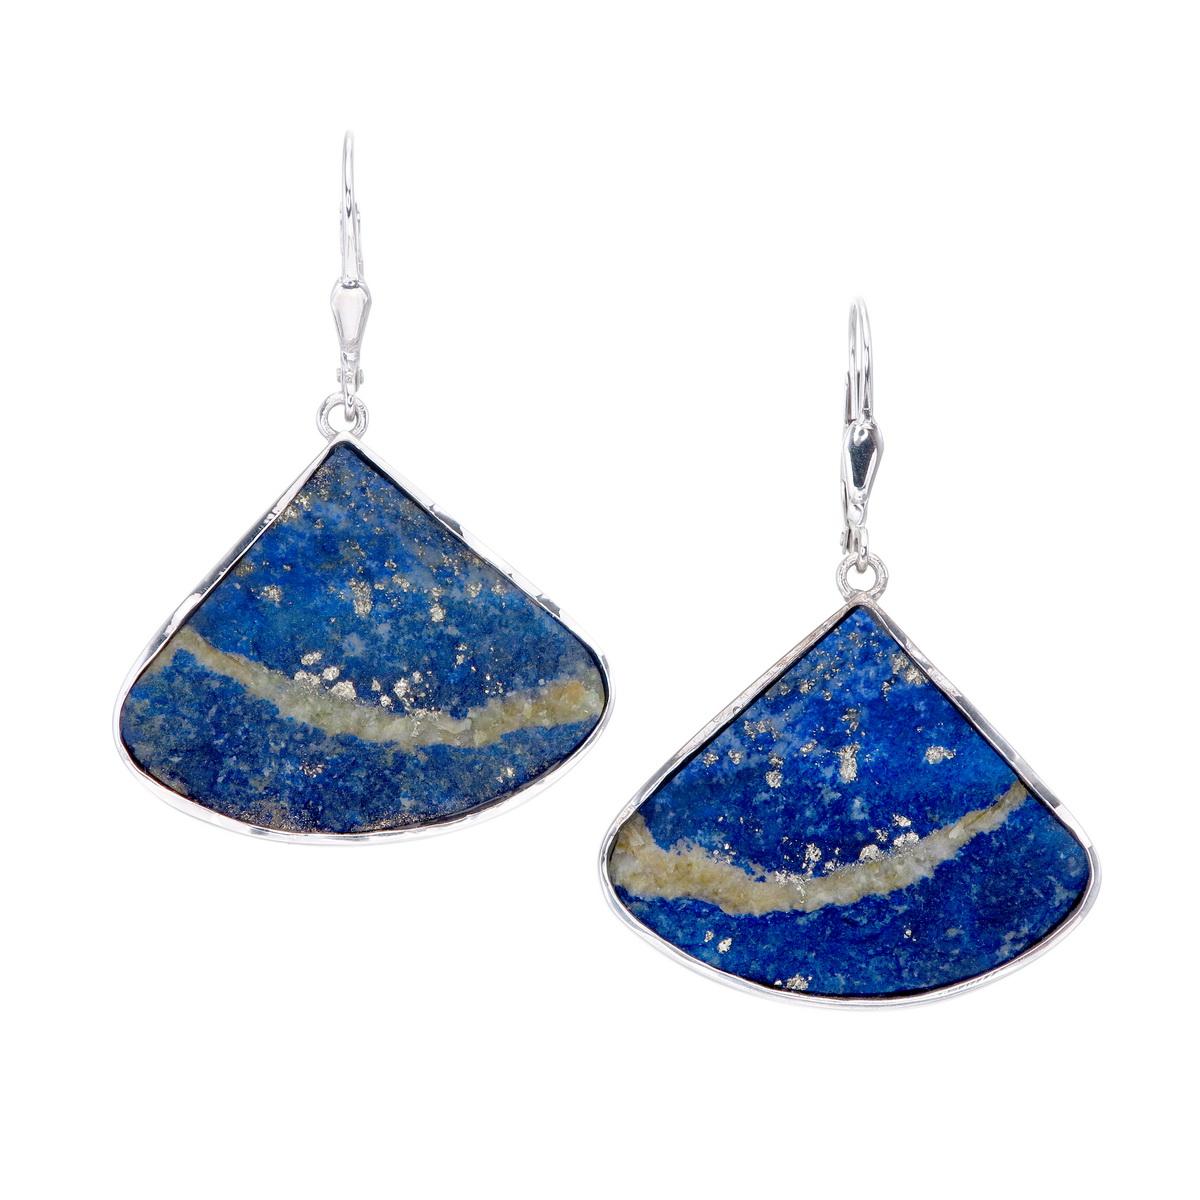 Handmade Orloff of Denmark; 61 carat Lapis Lazuli Sterling Silver Earrings 

From our latest collection based solely on the beautiful Lapis Lazuli.
Introducing our exquisite Lapis Lazuli Sterling Silver Earrings, a celestial masterpiece that